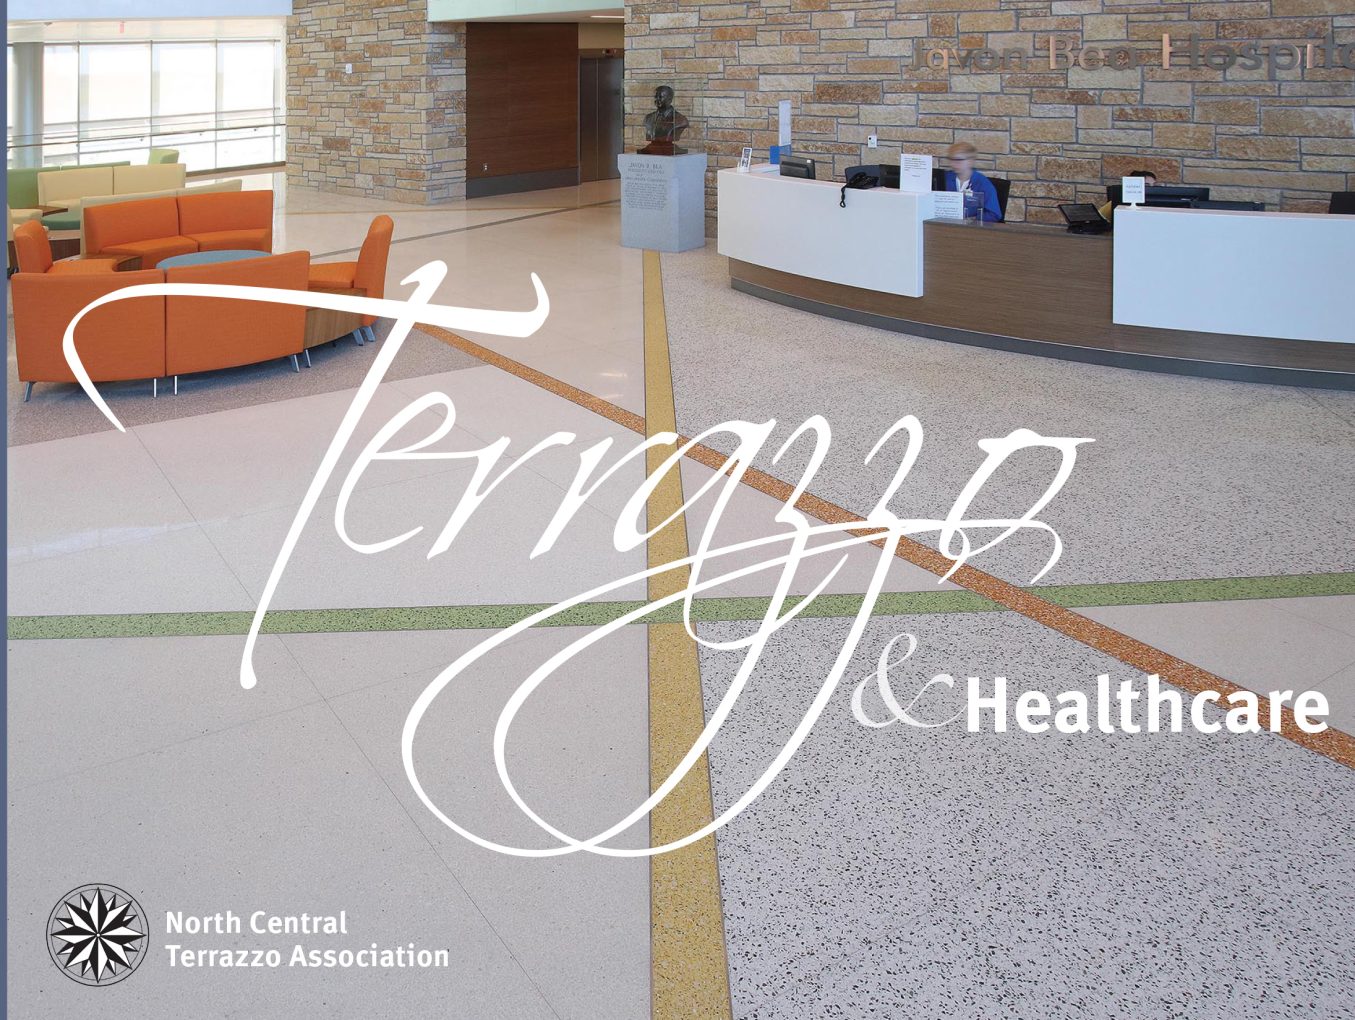 Beauty & Performance for Healthcare Facilities